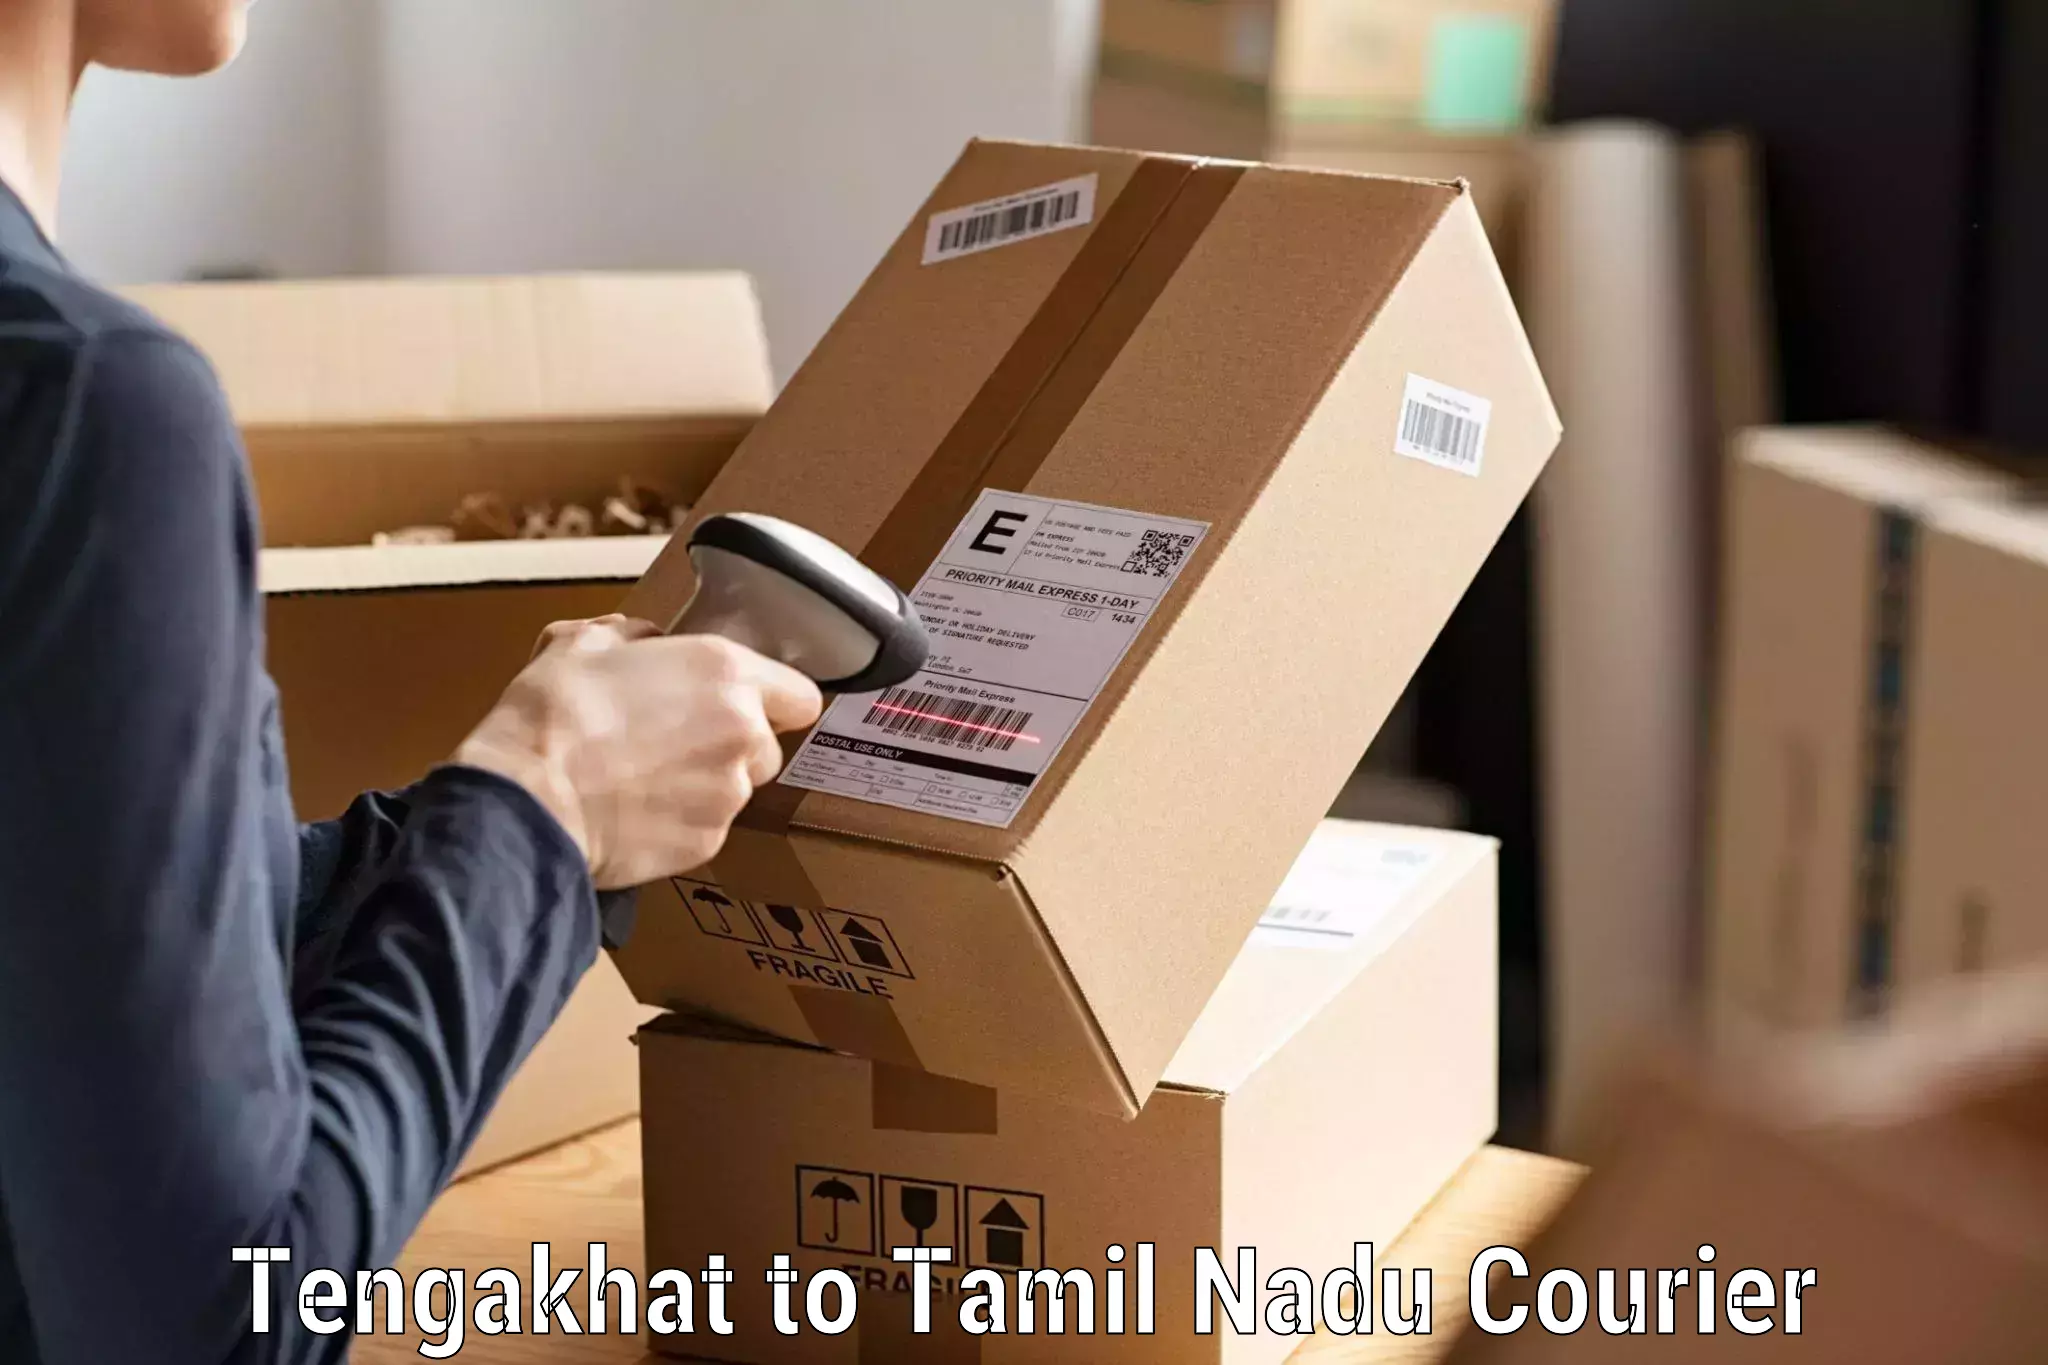 Rural area delivery Tengakhat to Mettupalayam